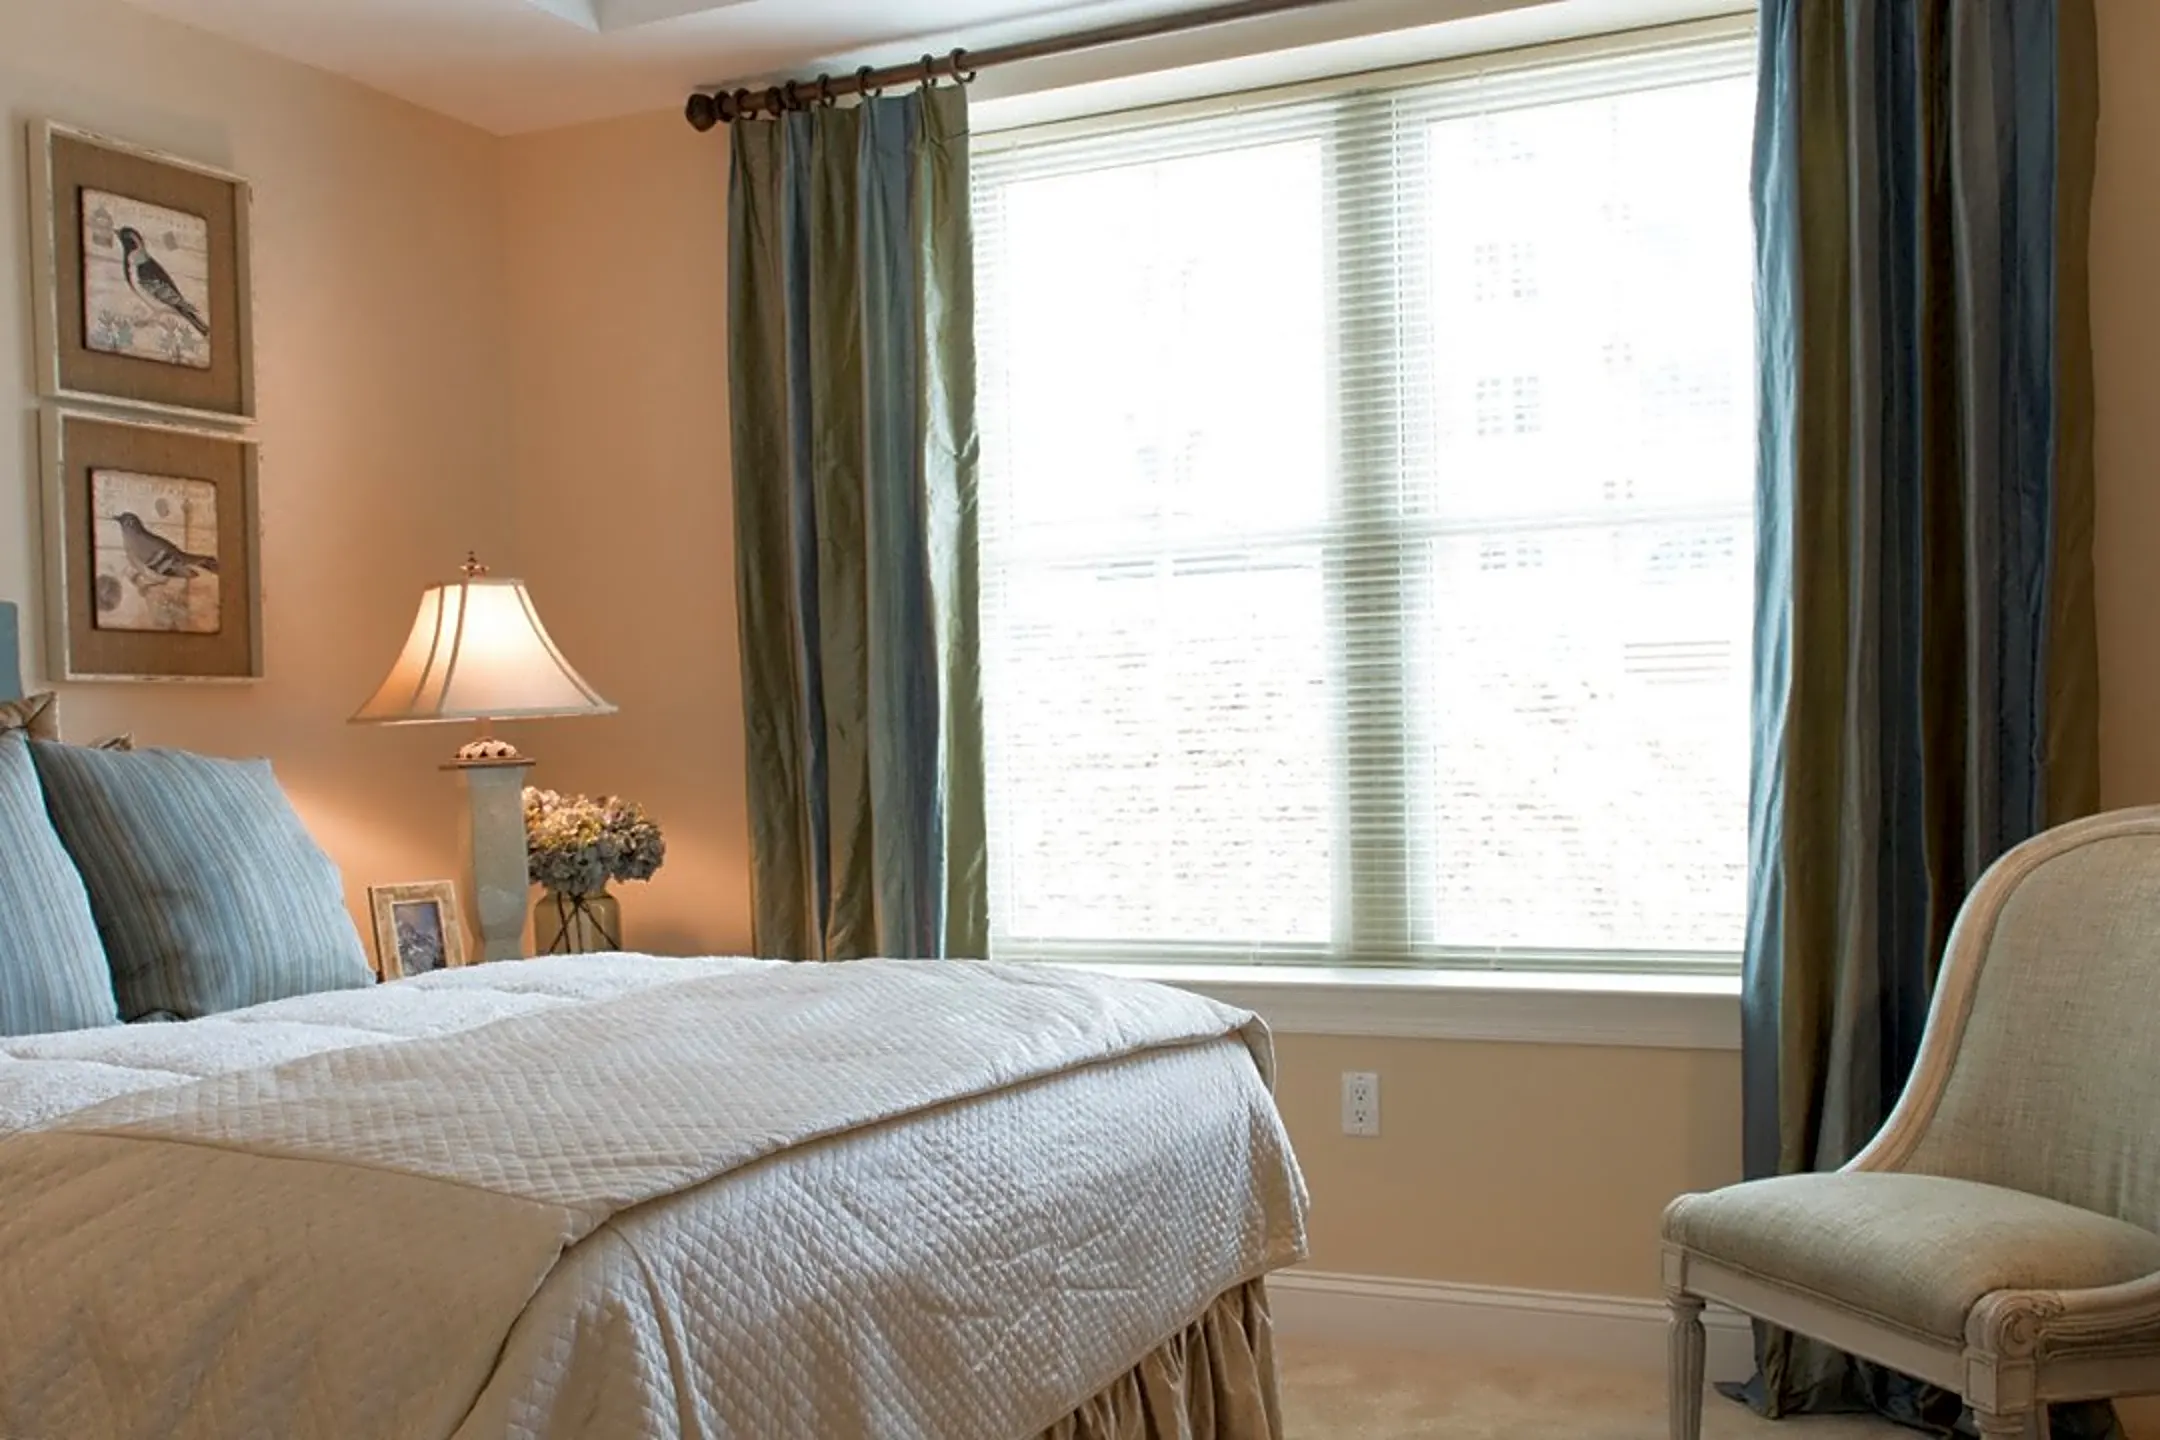 Bedroom - Meridian At Eagleview - Exton, PA